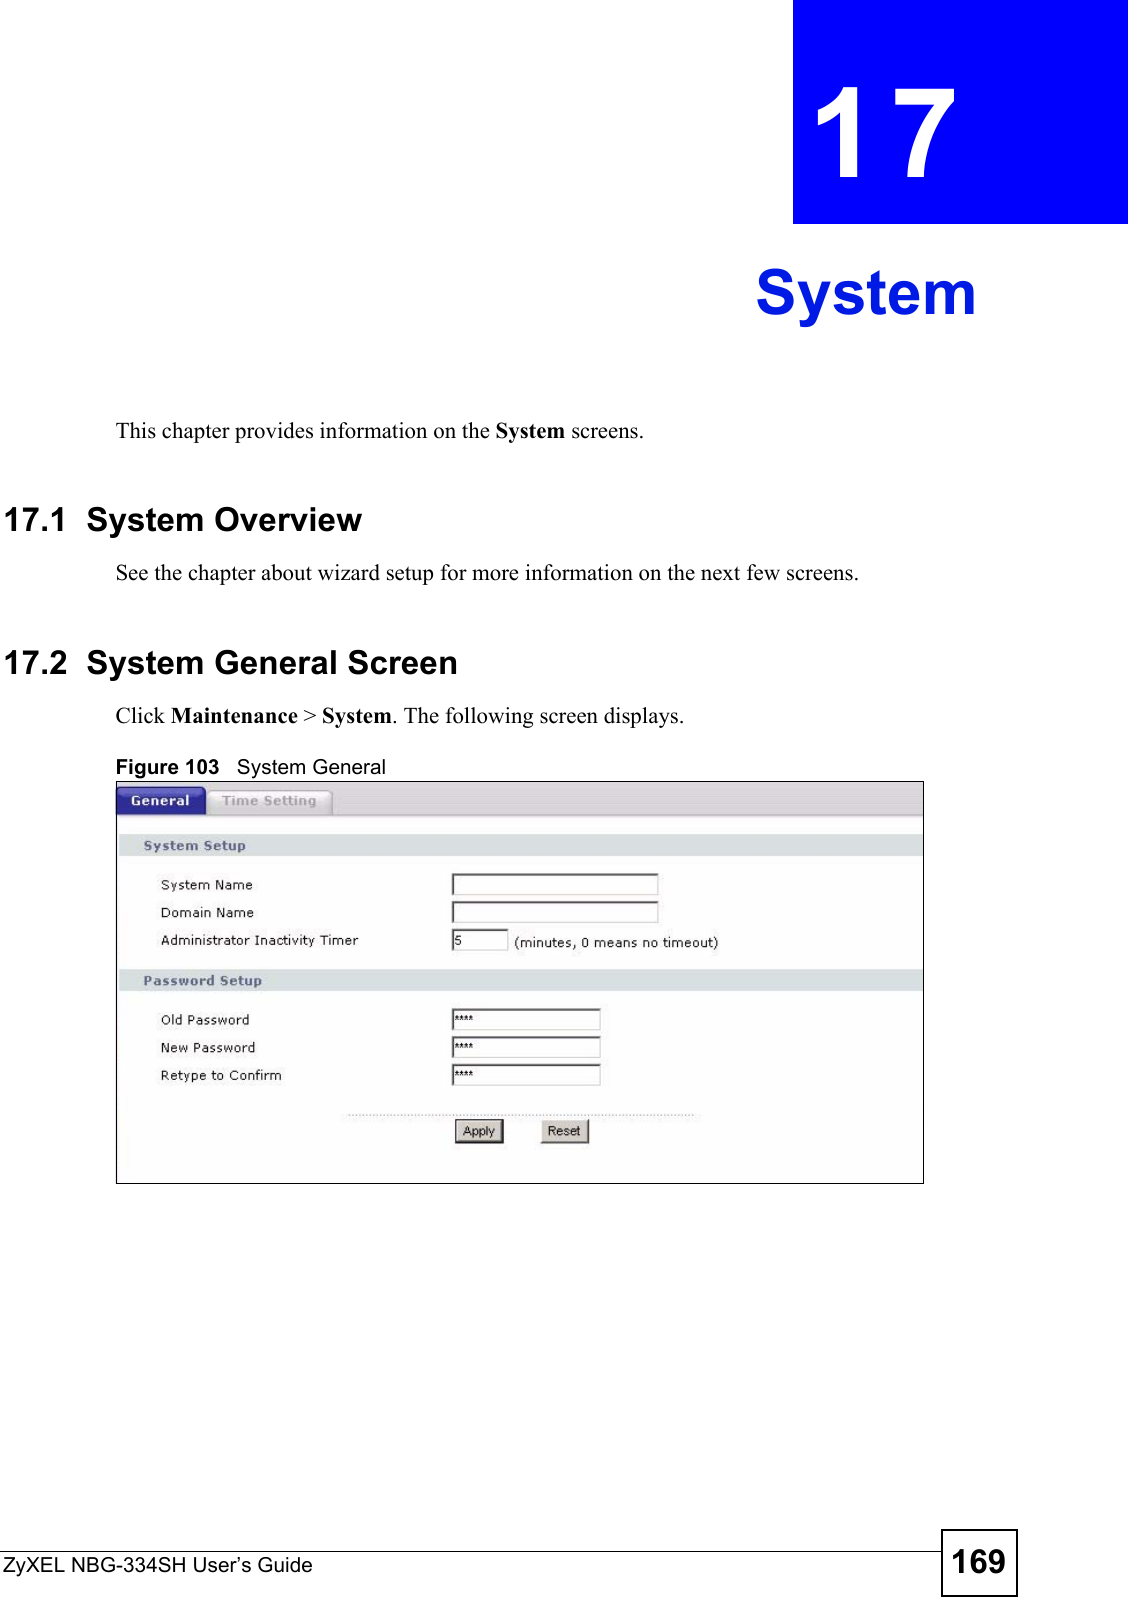 ZyXEL NBG-334SH User’s Guide 169CHAPTER  17 SystemThis chapter provides information on the System screens. 17.1  System OverviewSee the chapter about wizard setup for more information on the next few screens.17.2  System General Screen  Click Maintenance &gt; System. The following screen displays.Figure 103   System General 